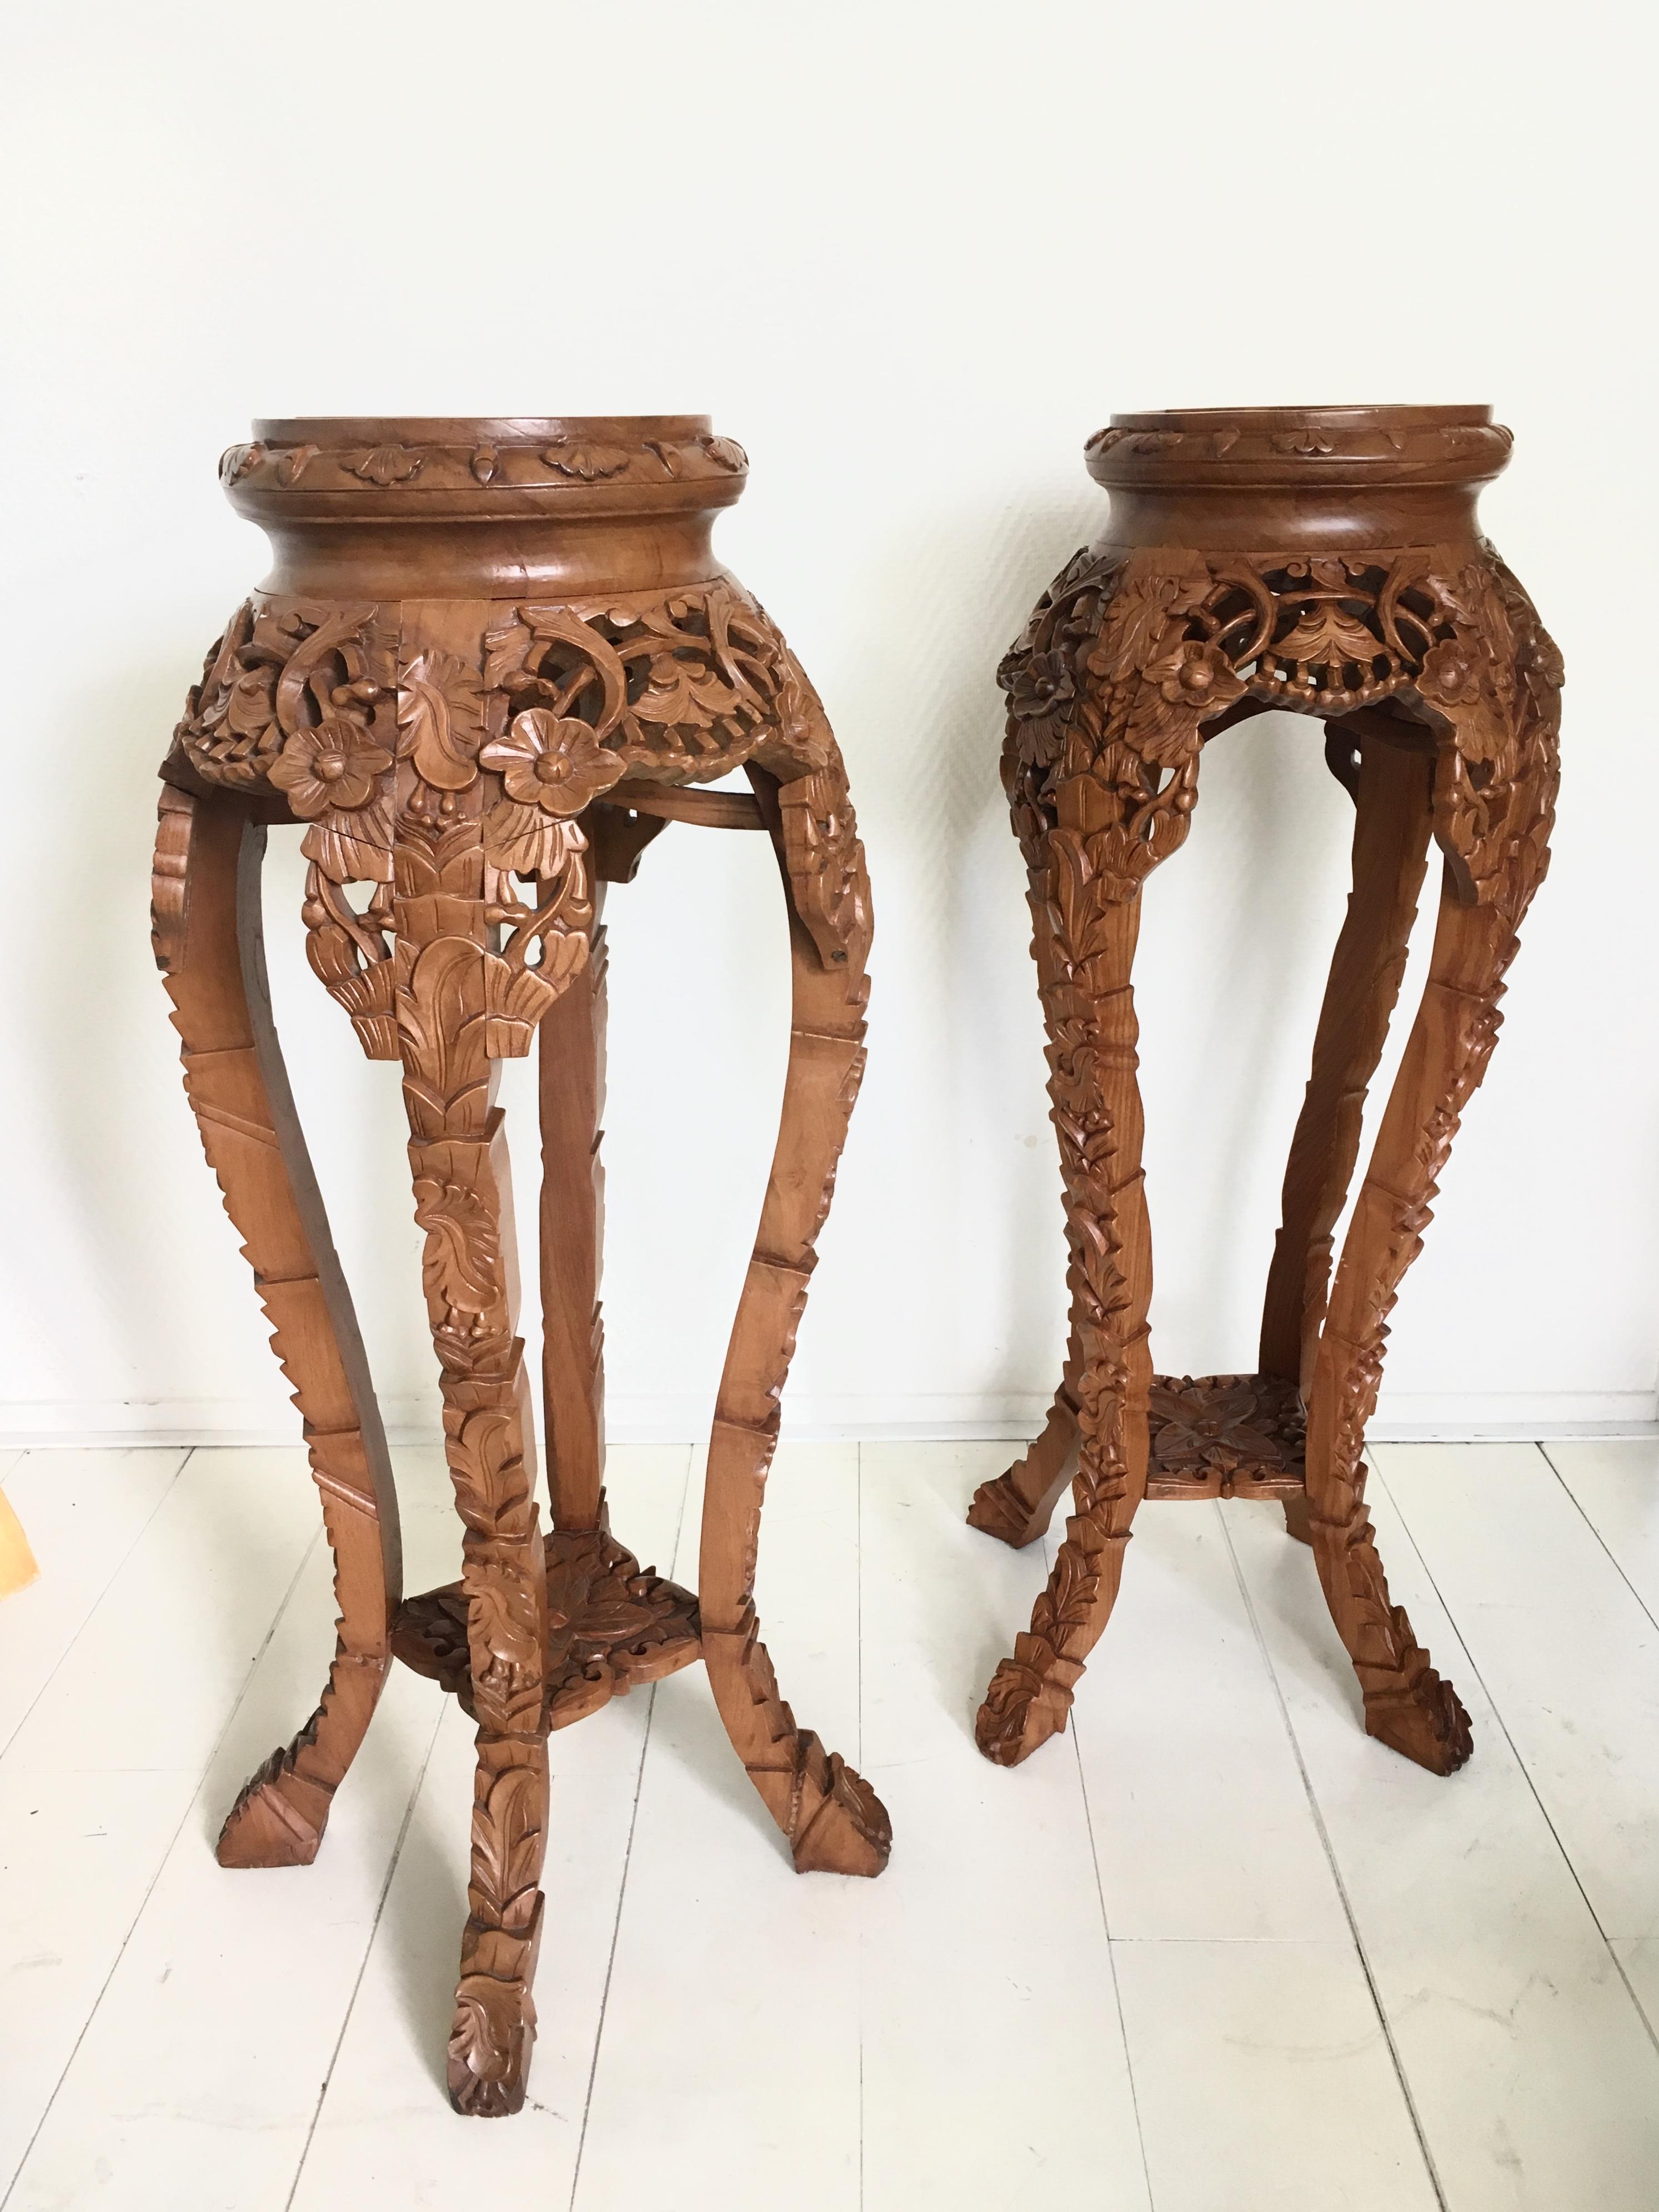 These wonderful Asian pieces were hand carved from fruitwood by an unknown artist. They remain in very nice condition and only show minimal signs of age and use. They feature beautiful floral details and would fit perfectly in a Bohemian home. 